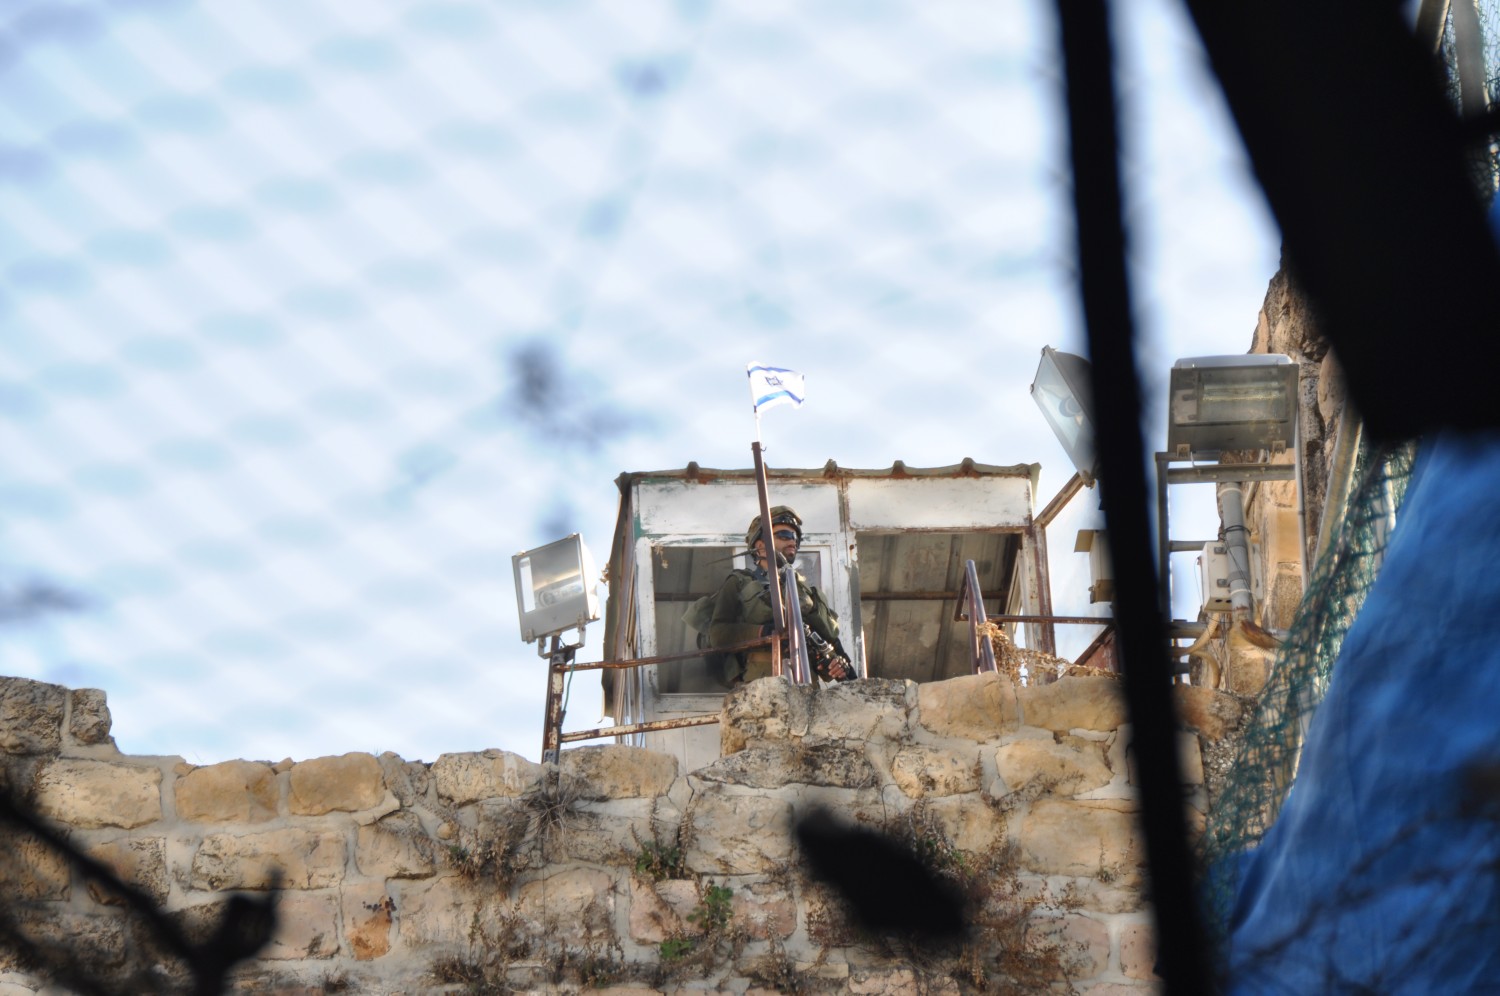 A soldier overlooking Hebron; seen through the nets